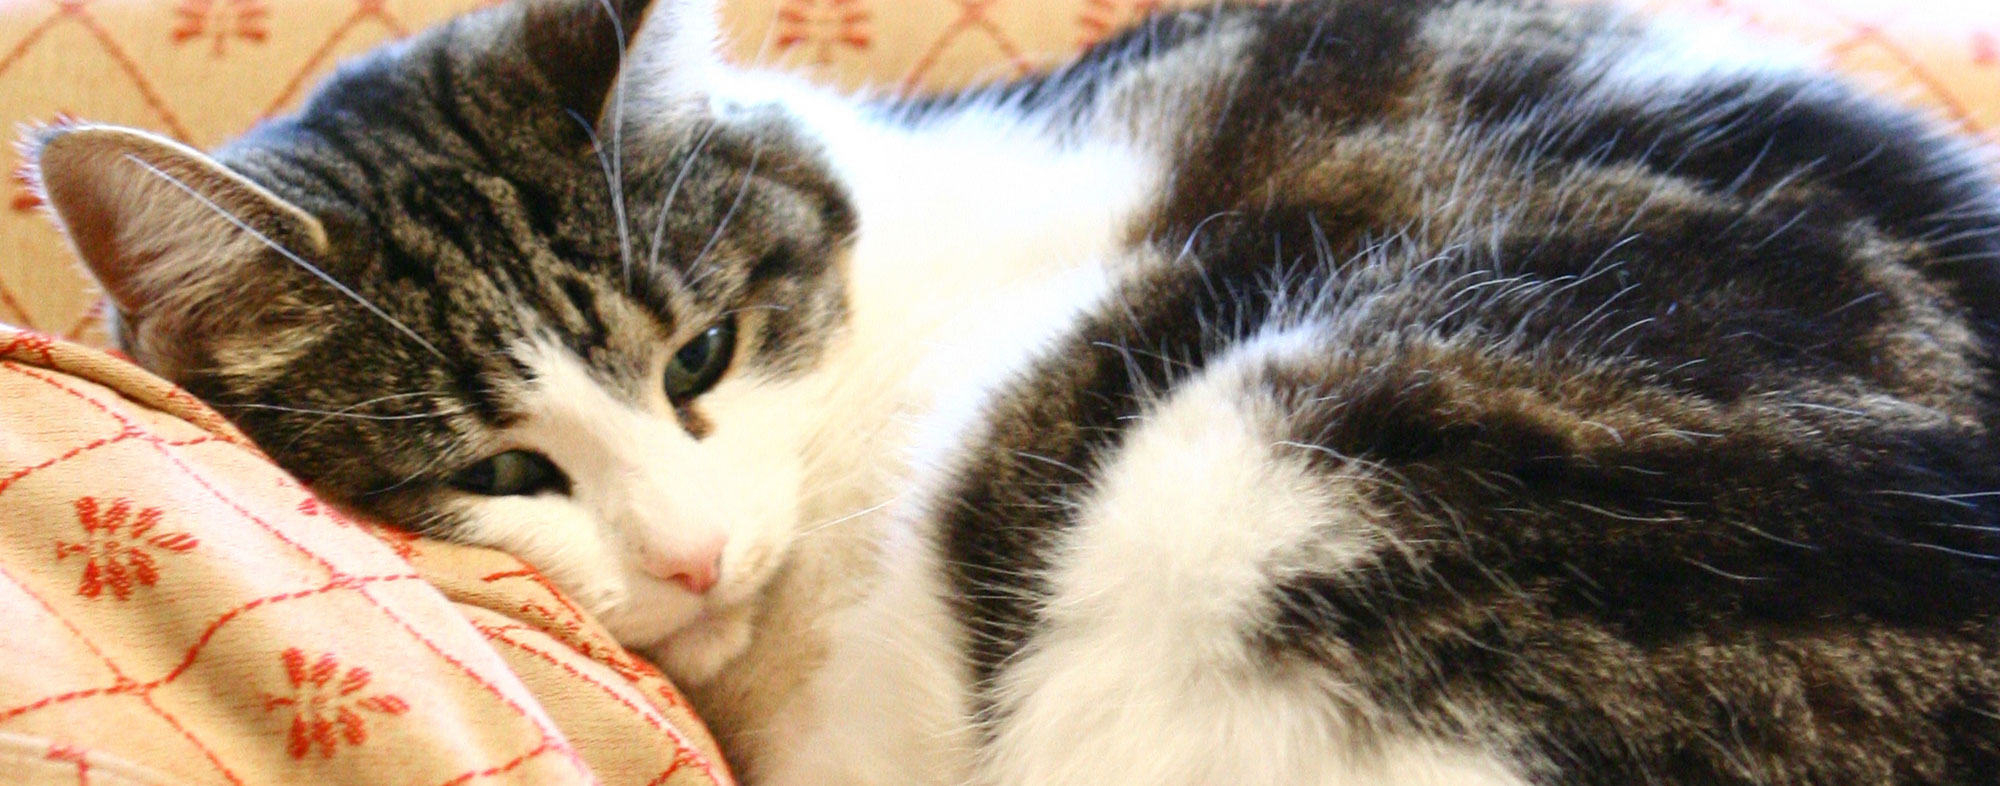 A cat with arthritis may be not willing to get up after sleeping